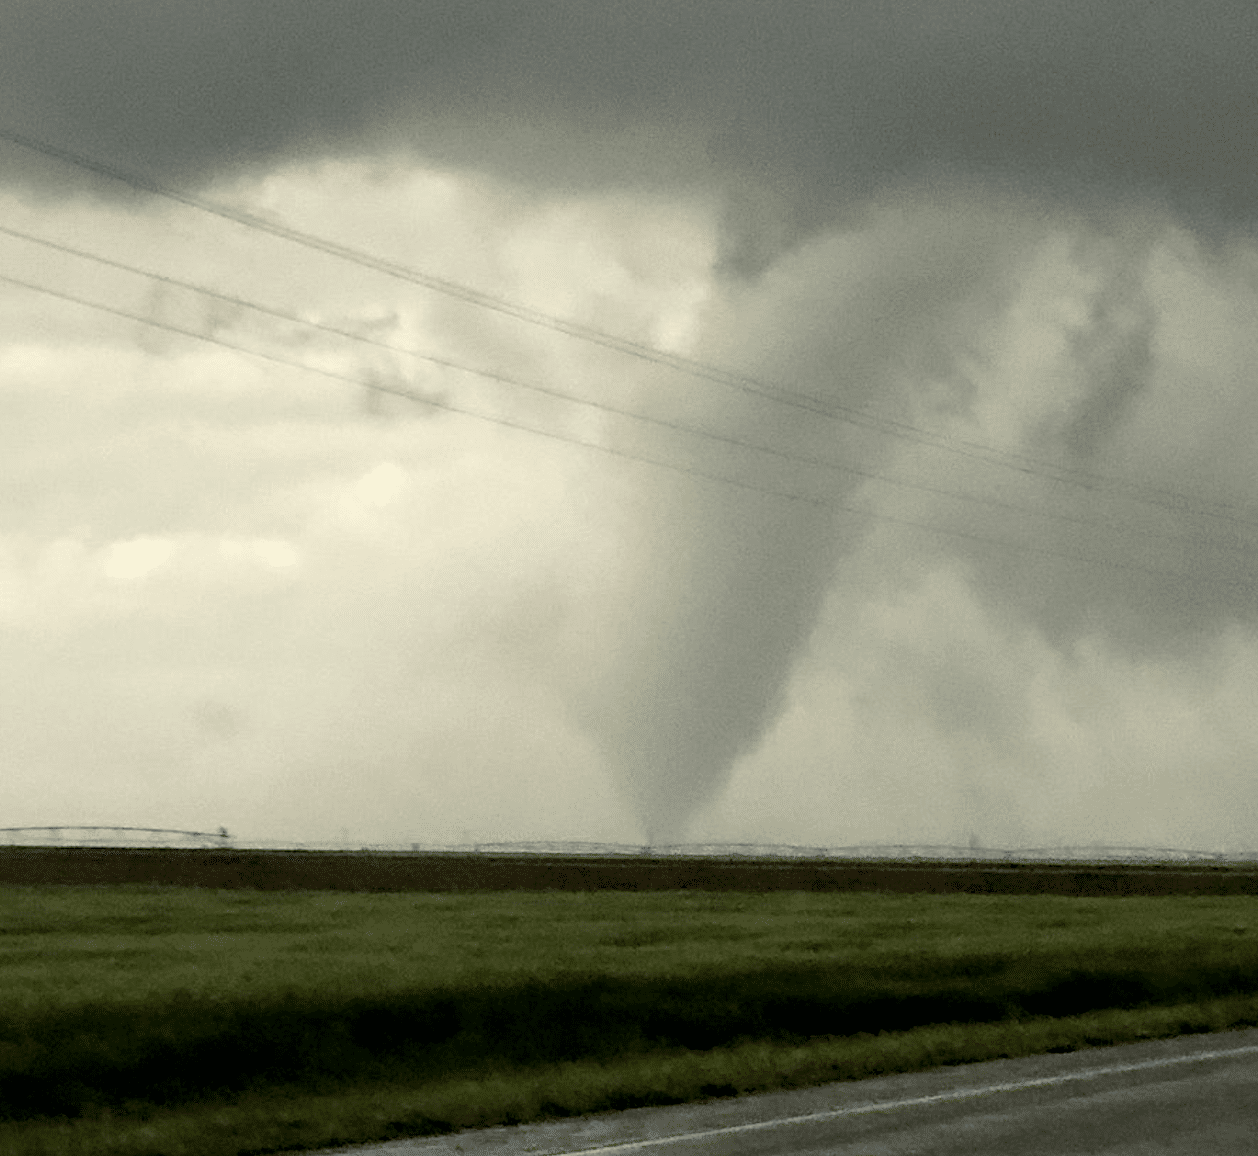 Deadly Thunderstorms: Tornado 8 miles southeast of Spearman, Texas, on Tuesday.